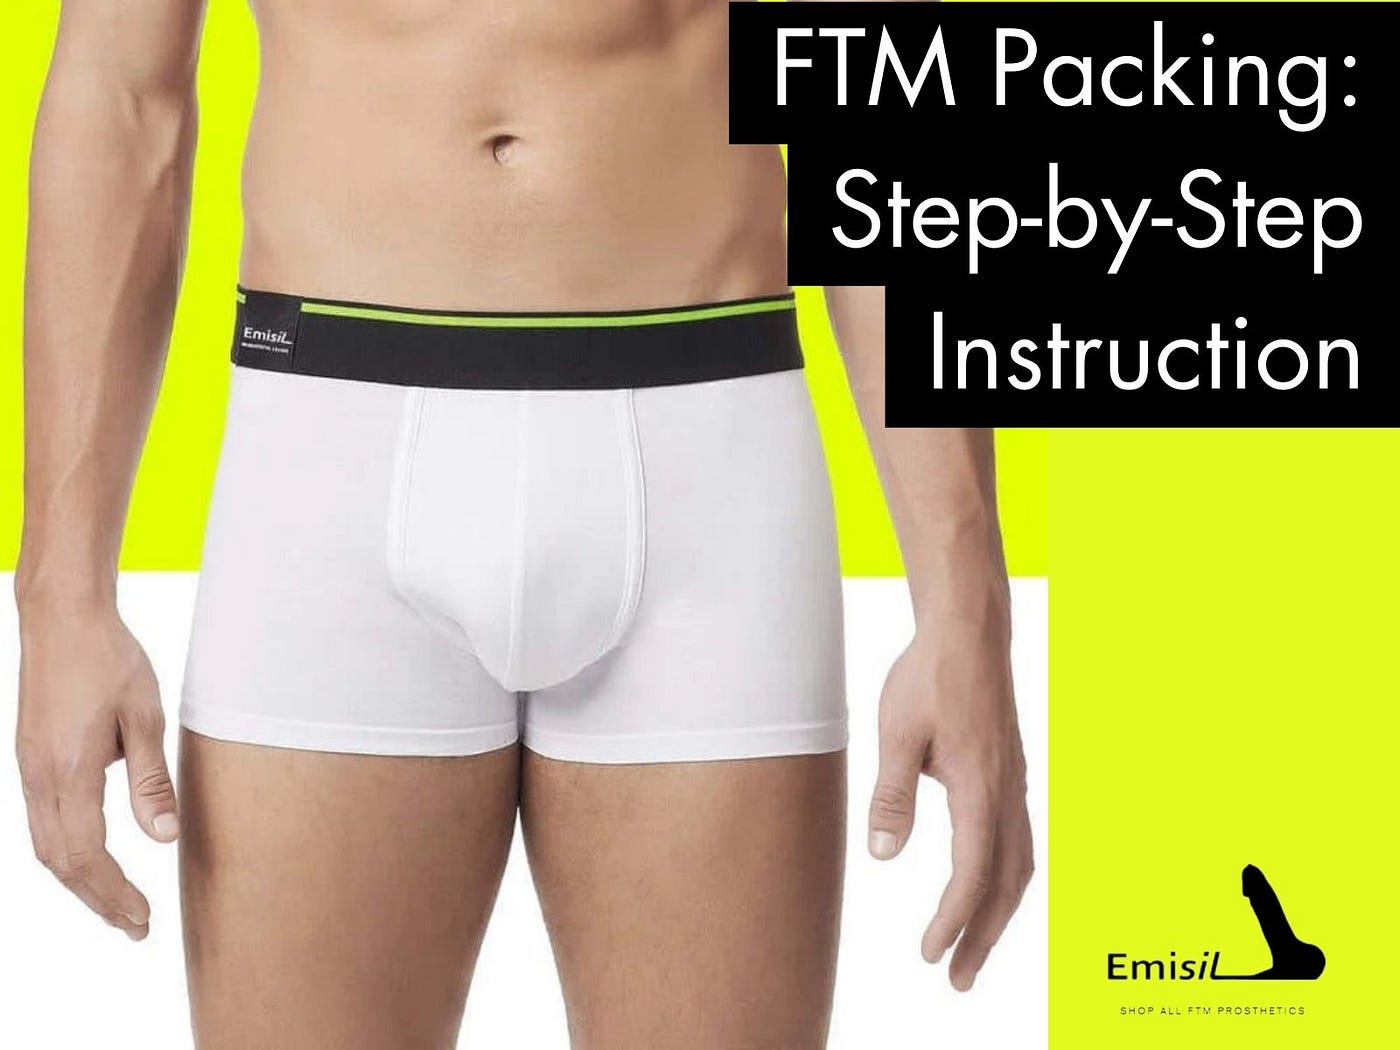 Emisil's Boxers and FTM Packing: A Step-by-Step Instruction